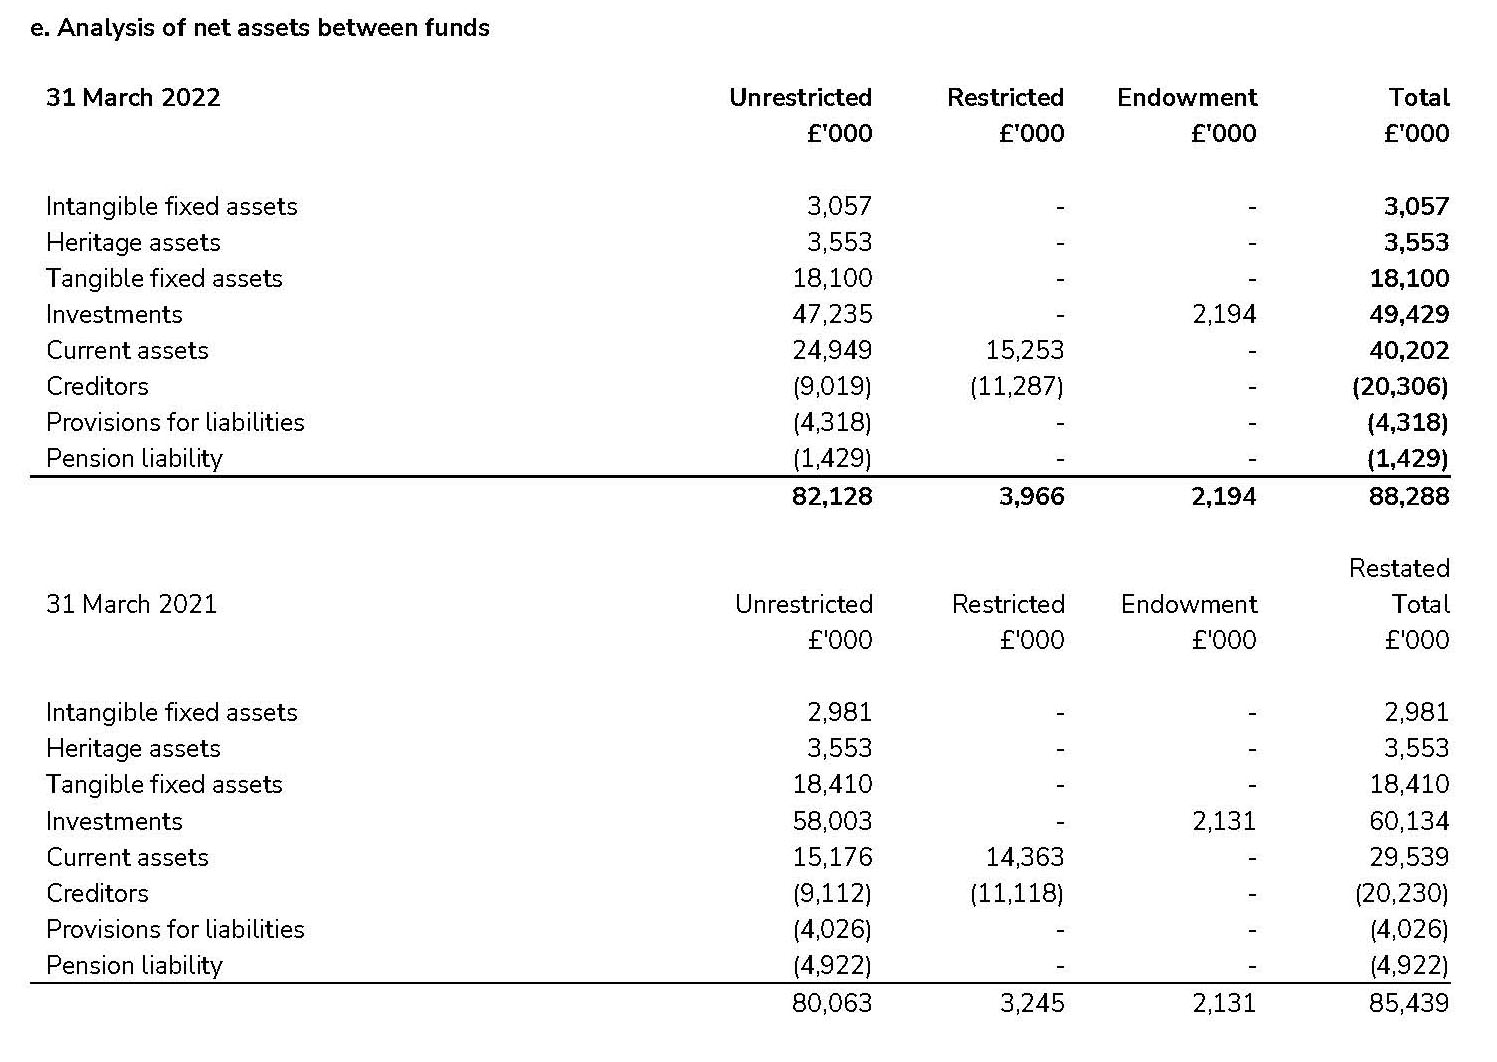 Table showing Scouts analysis of net assets between funds